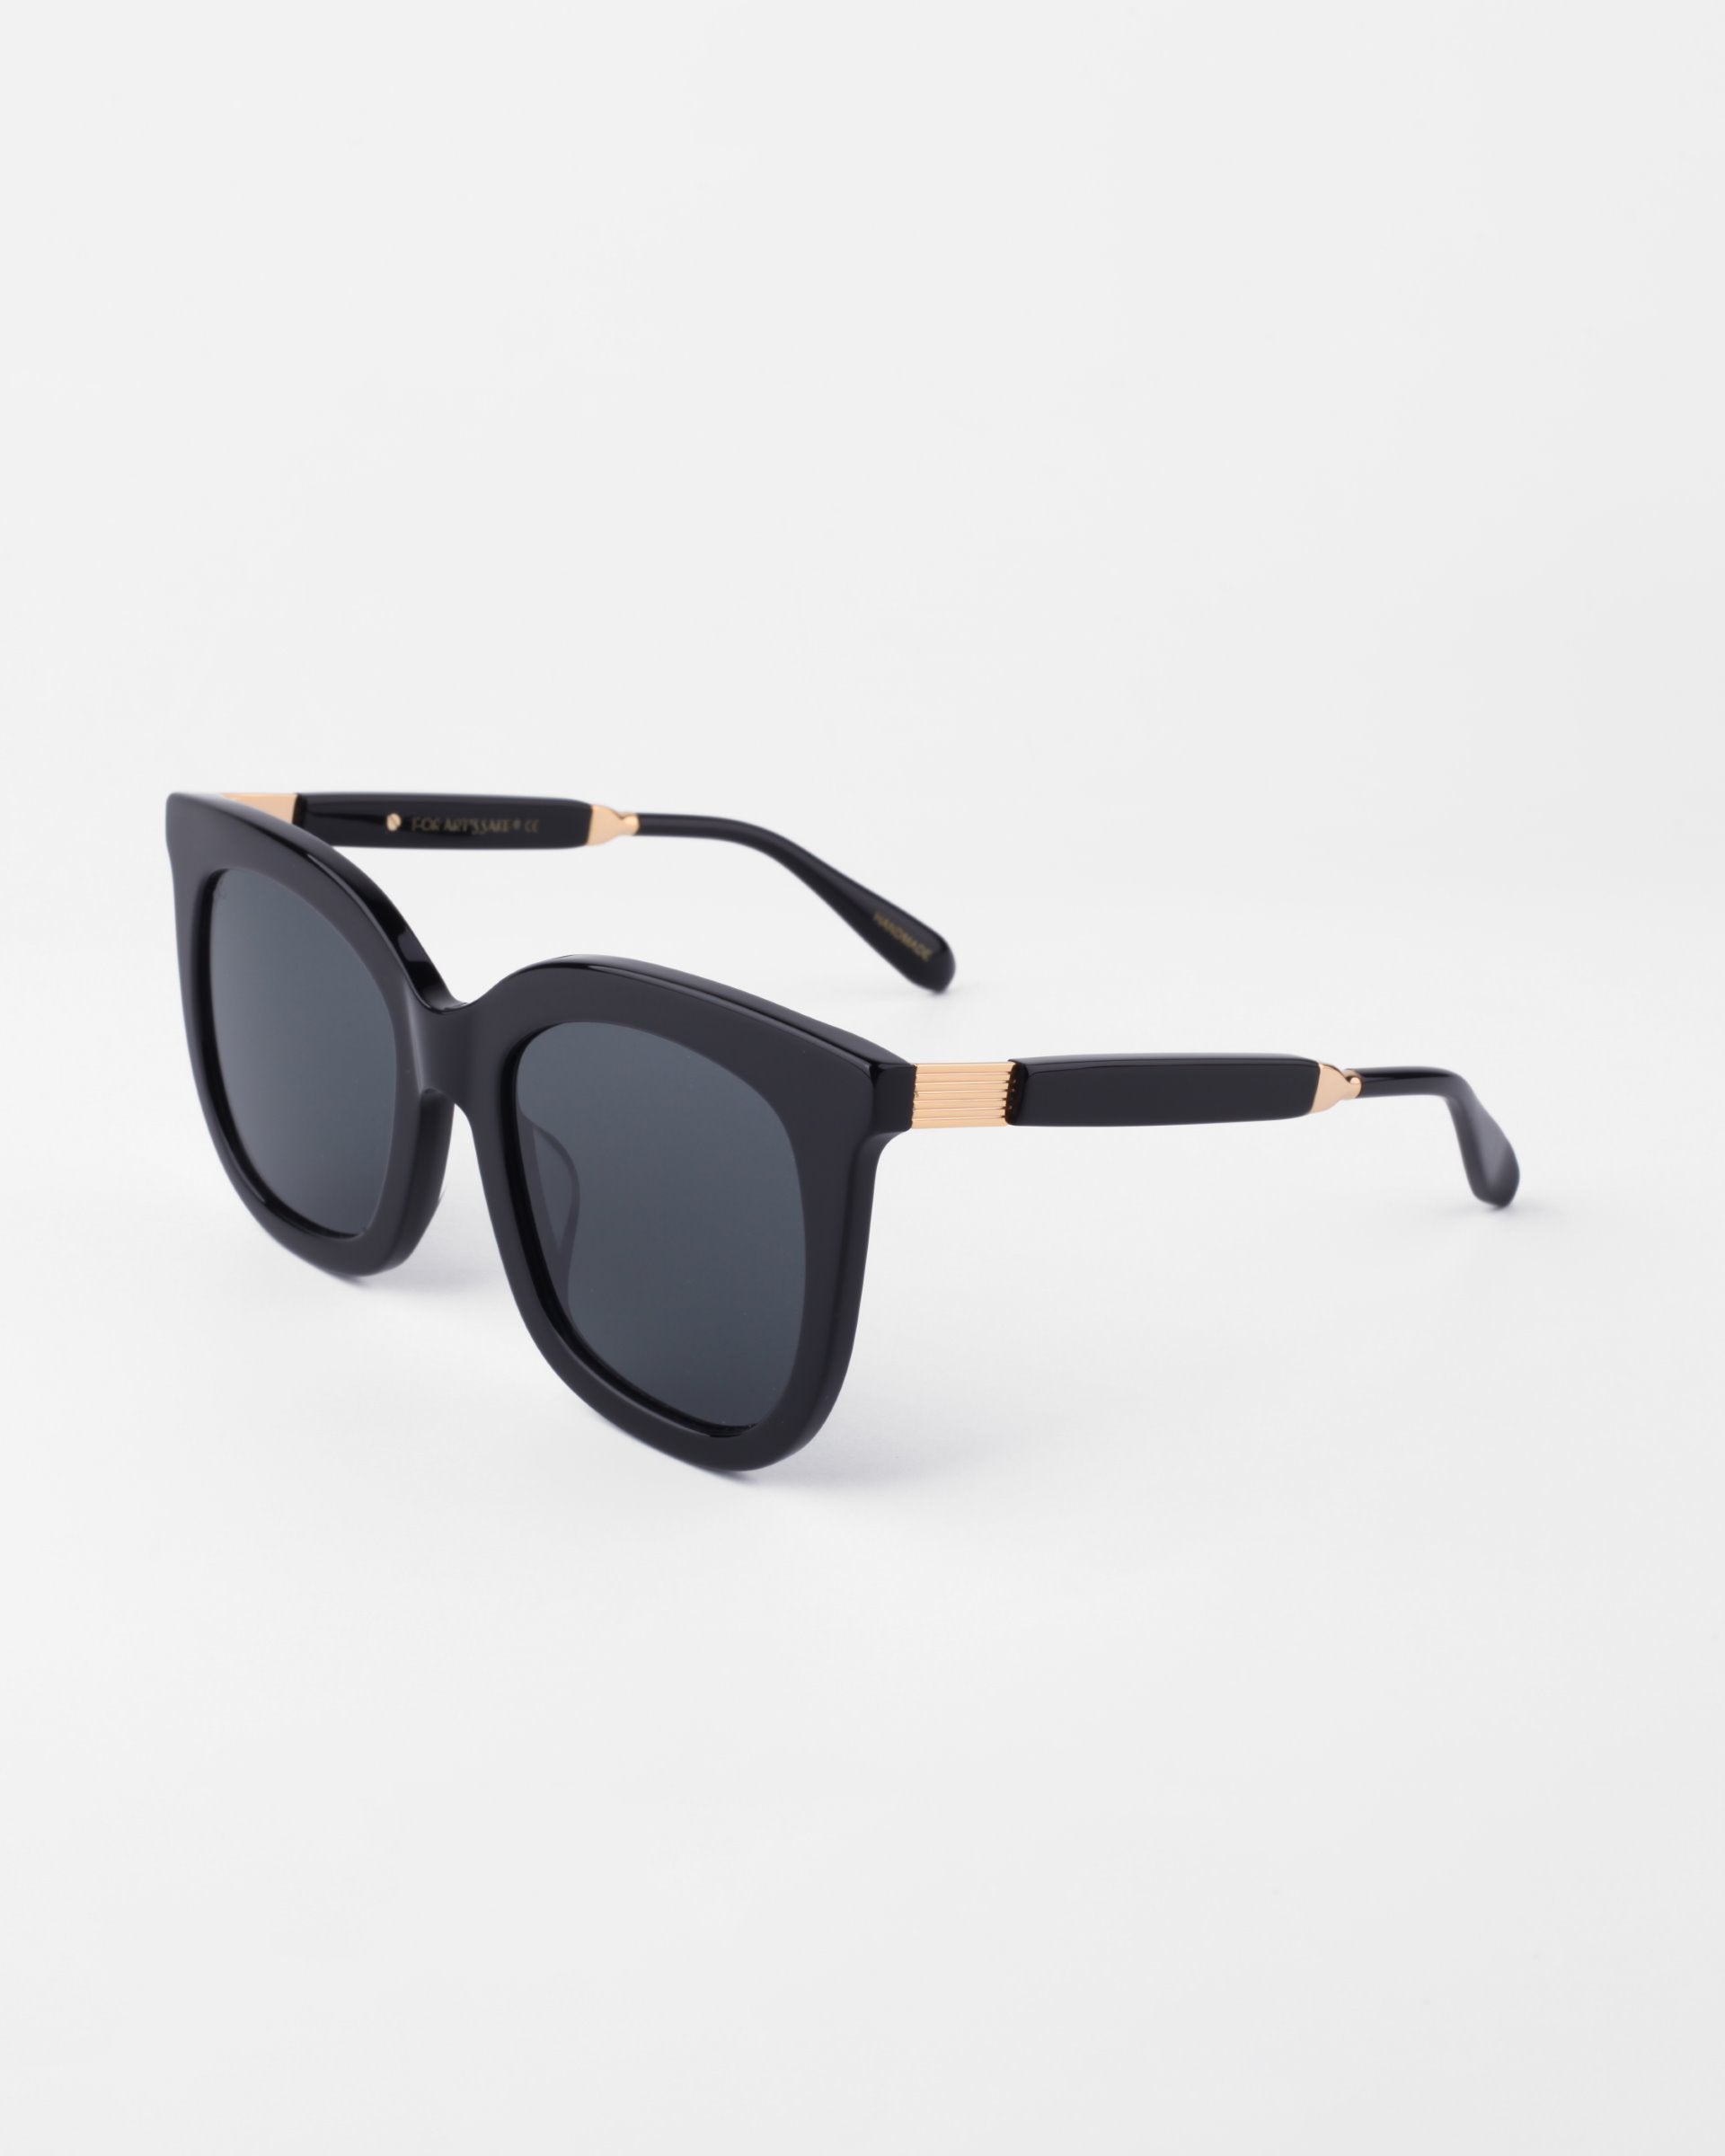 A pair of Riverside by For Art's Sake® black square-framed sunglasses with shatter-resistant lenses and gold-plated detailing on the temples and arms, displayed on a plain white background.